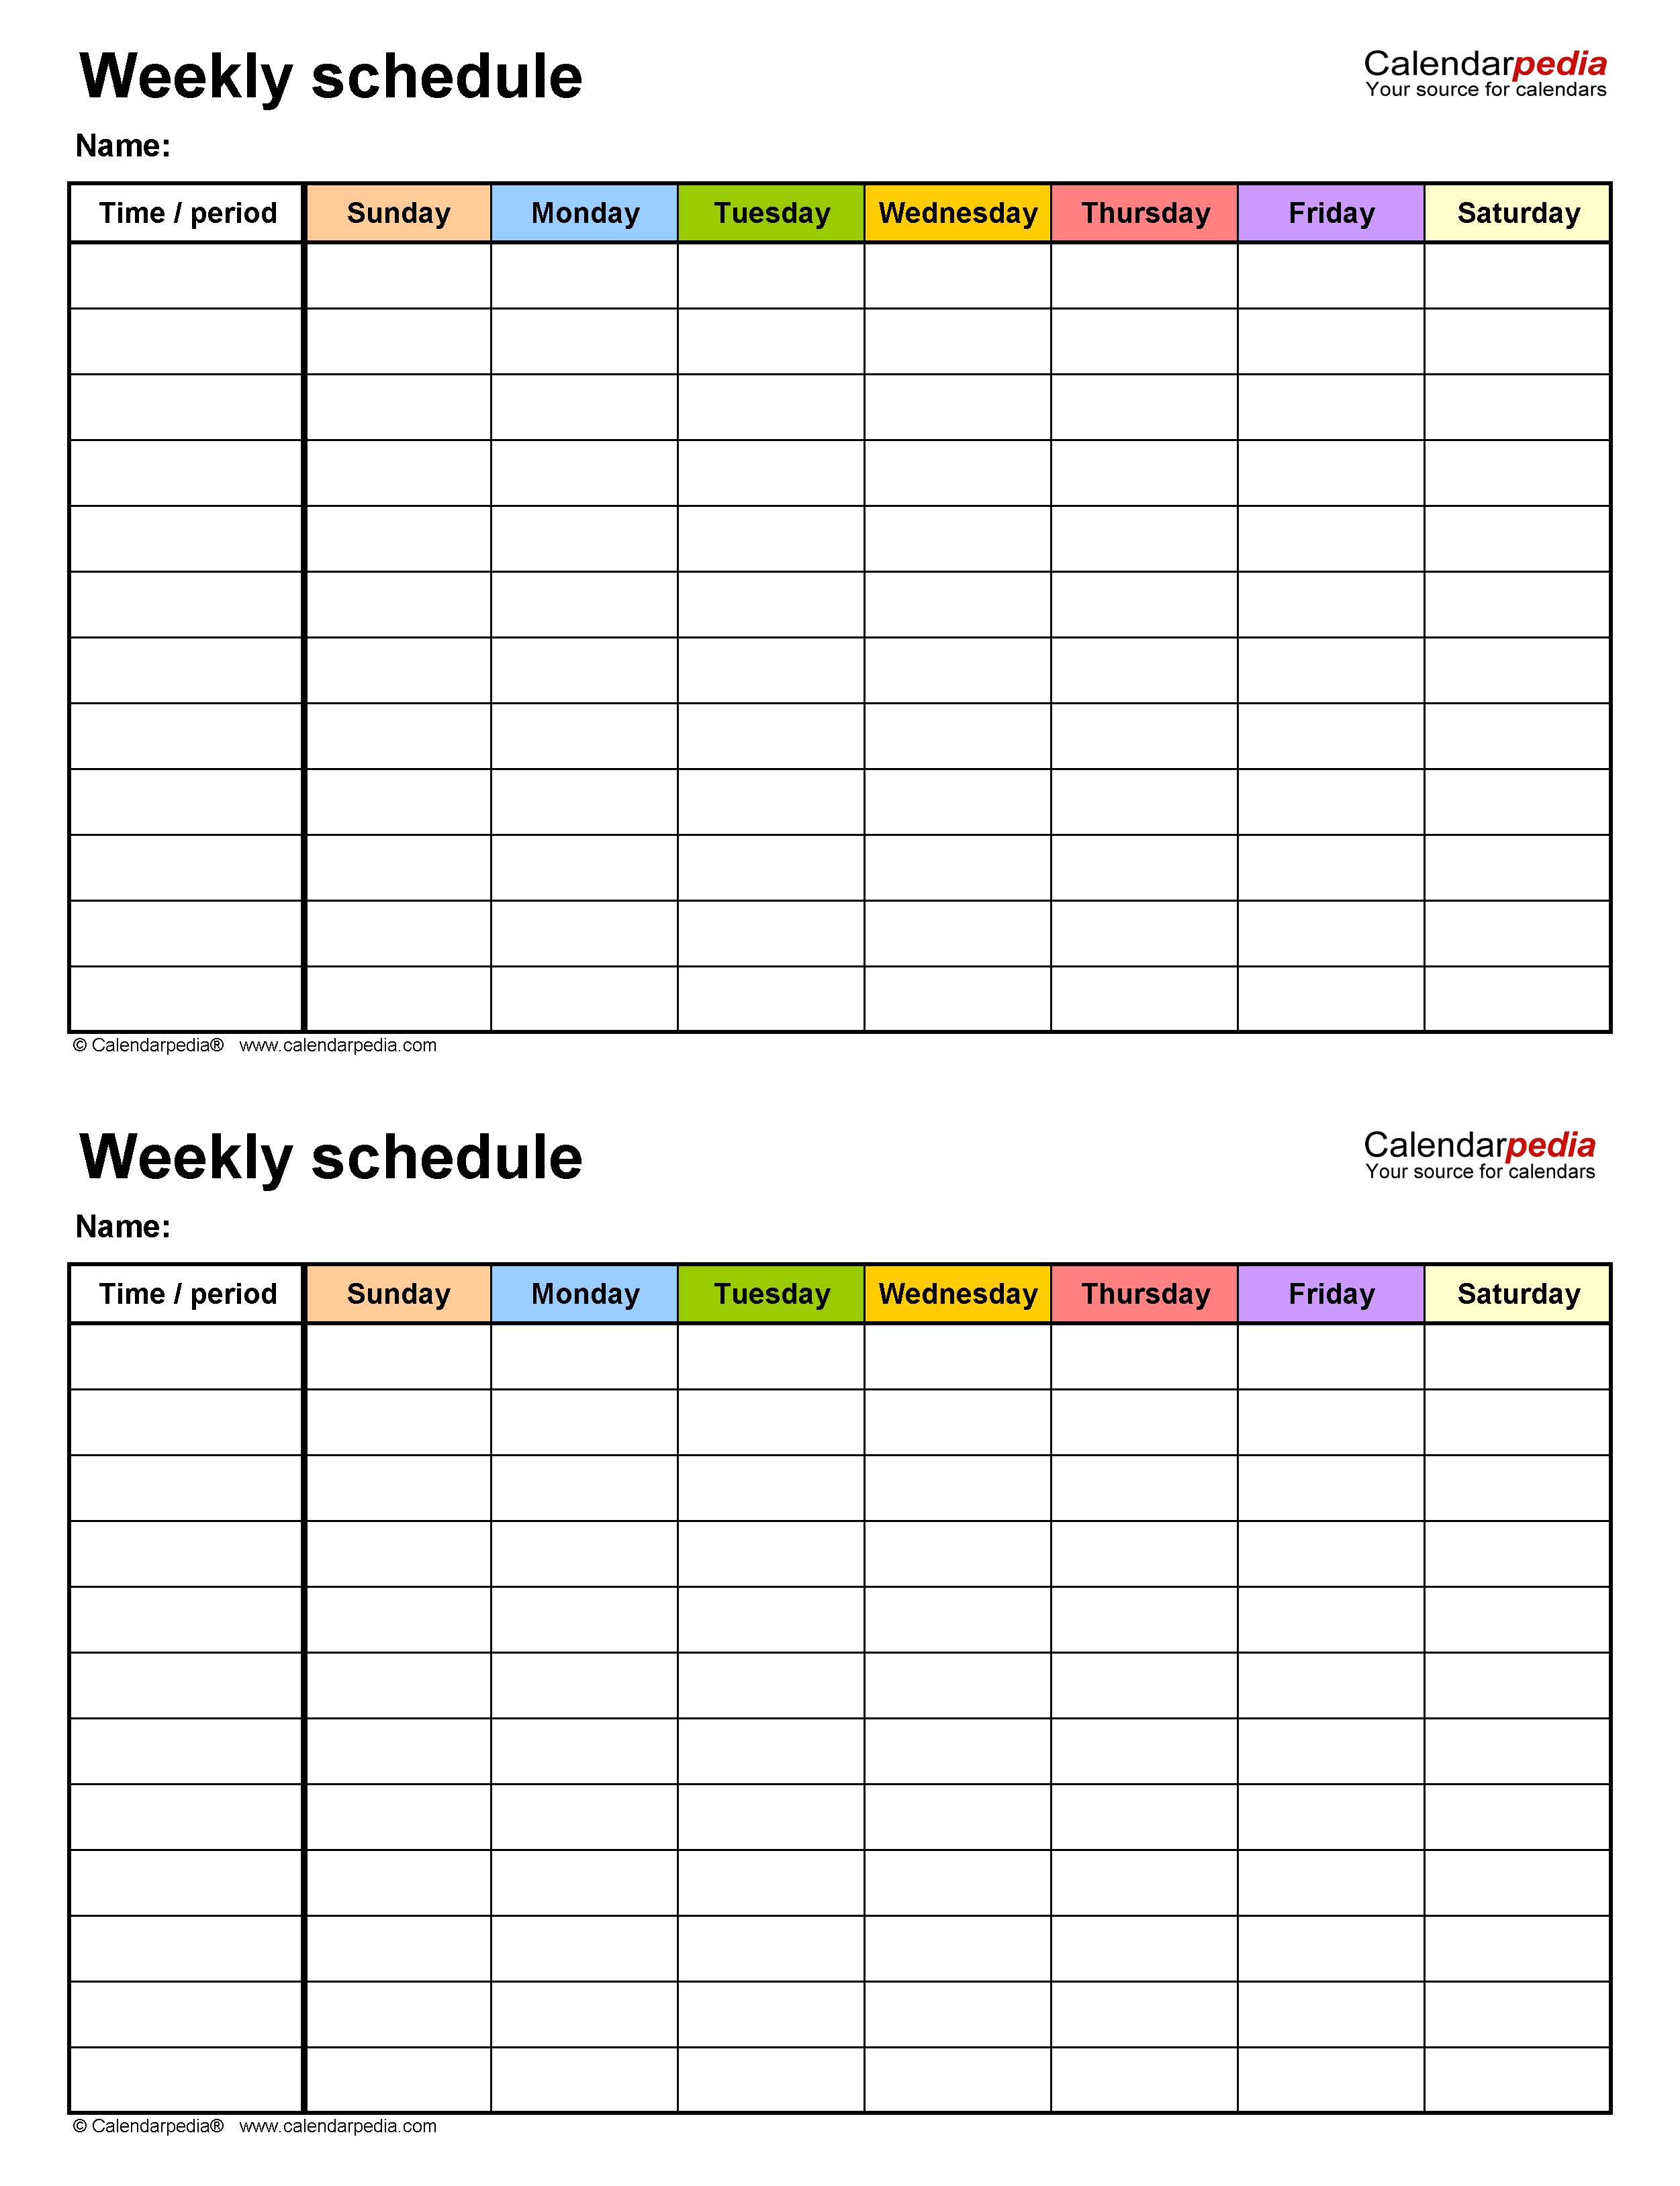 Free Weekly Schedule Templates For Word - 18 Templates  Weekly 7 Day Planner